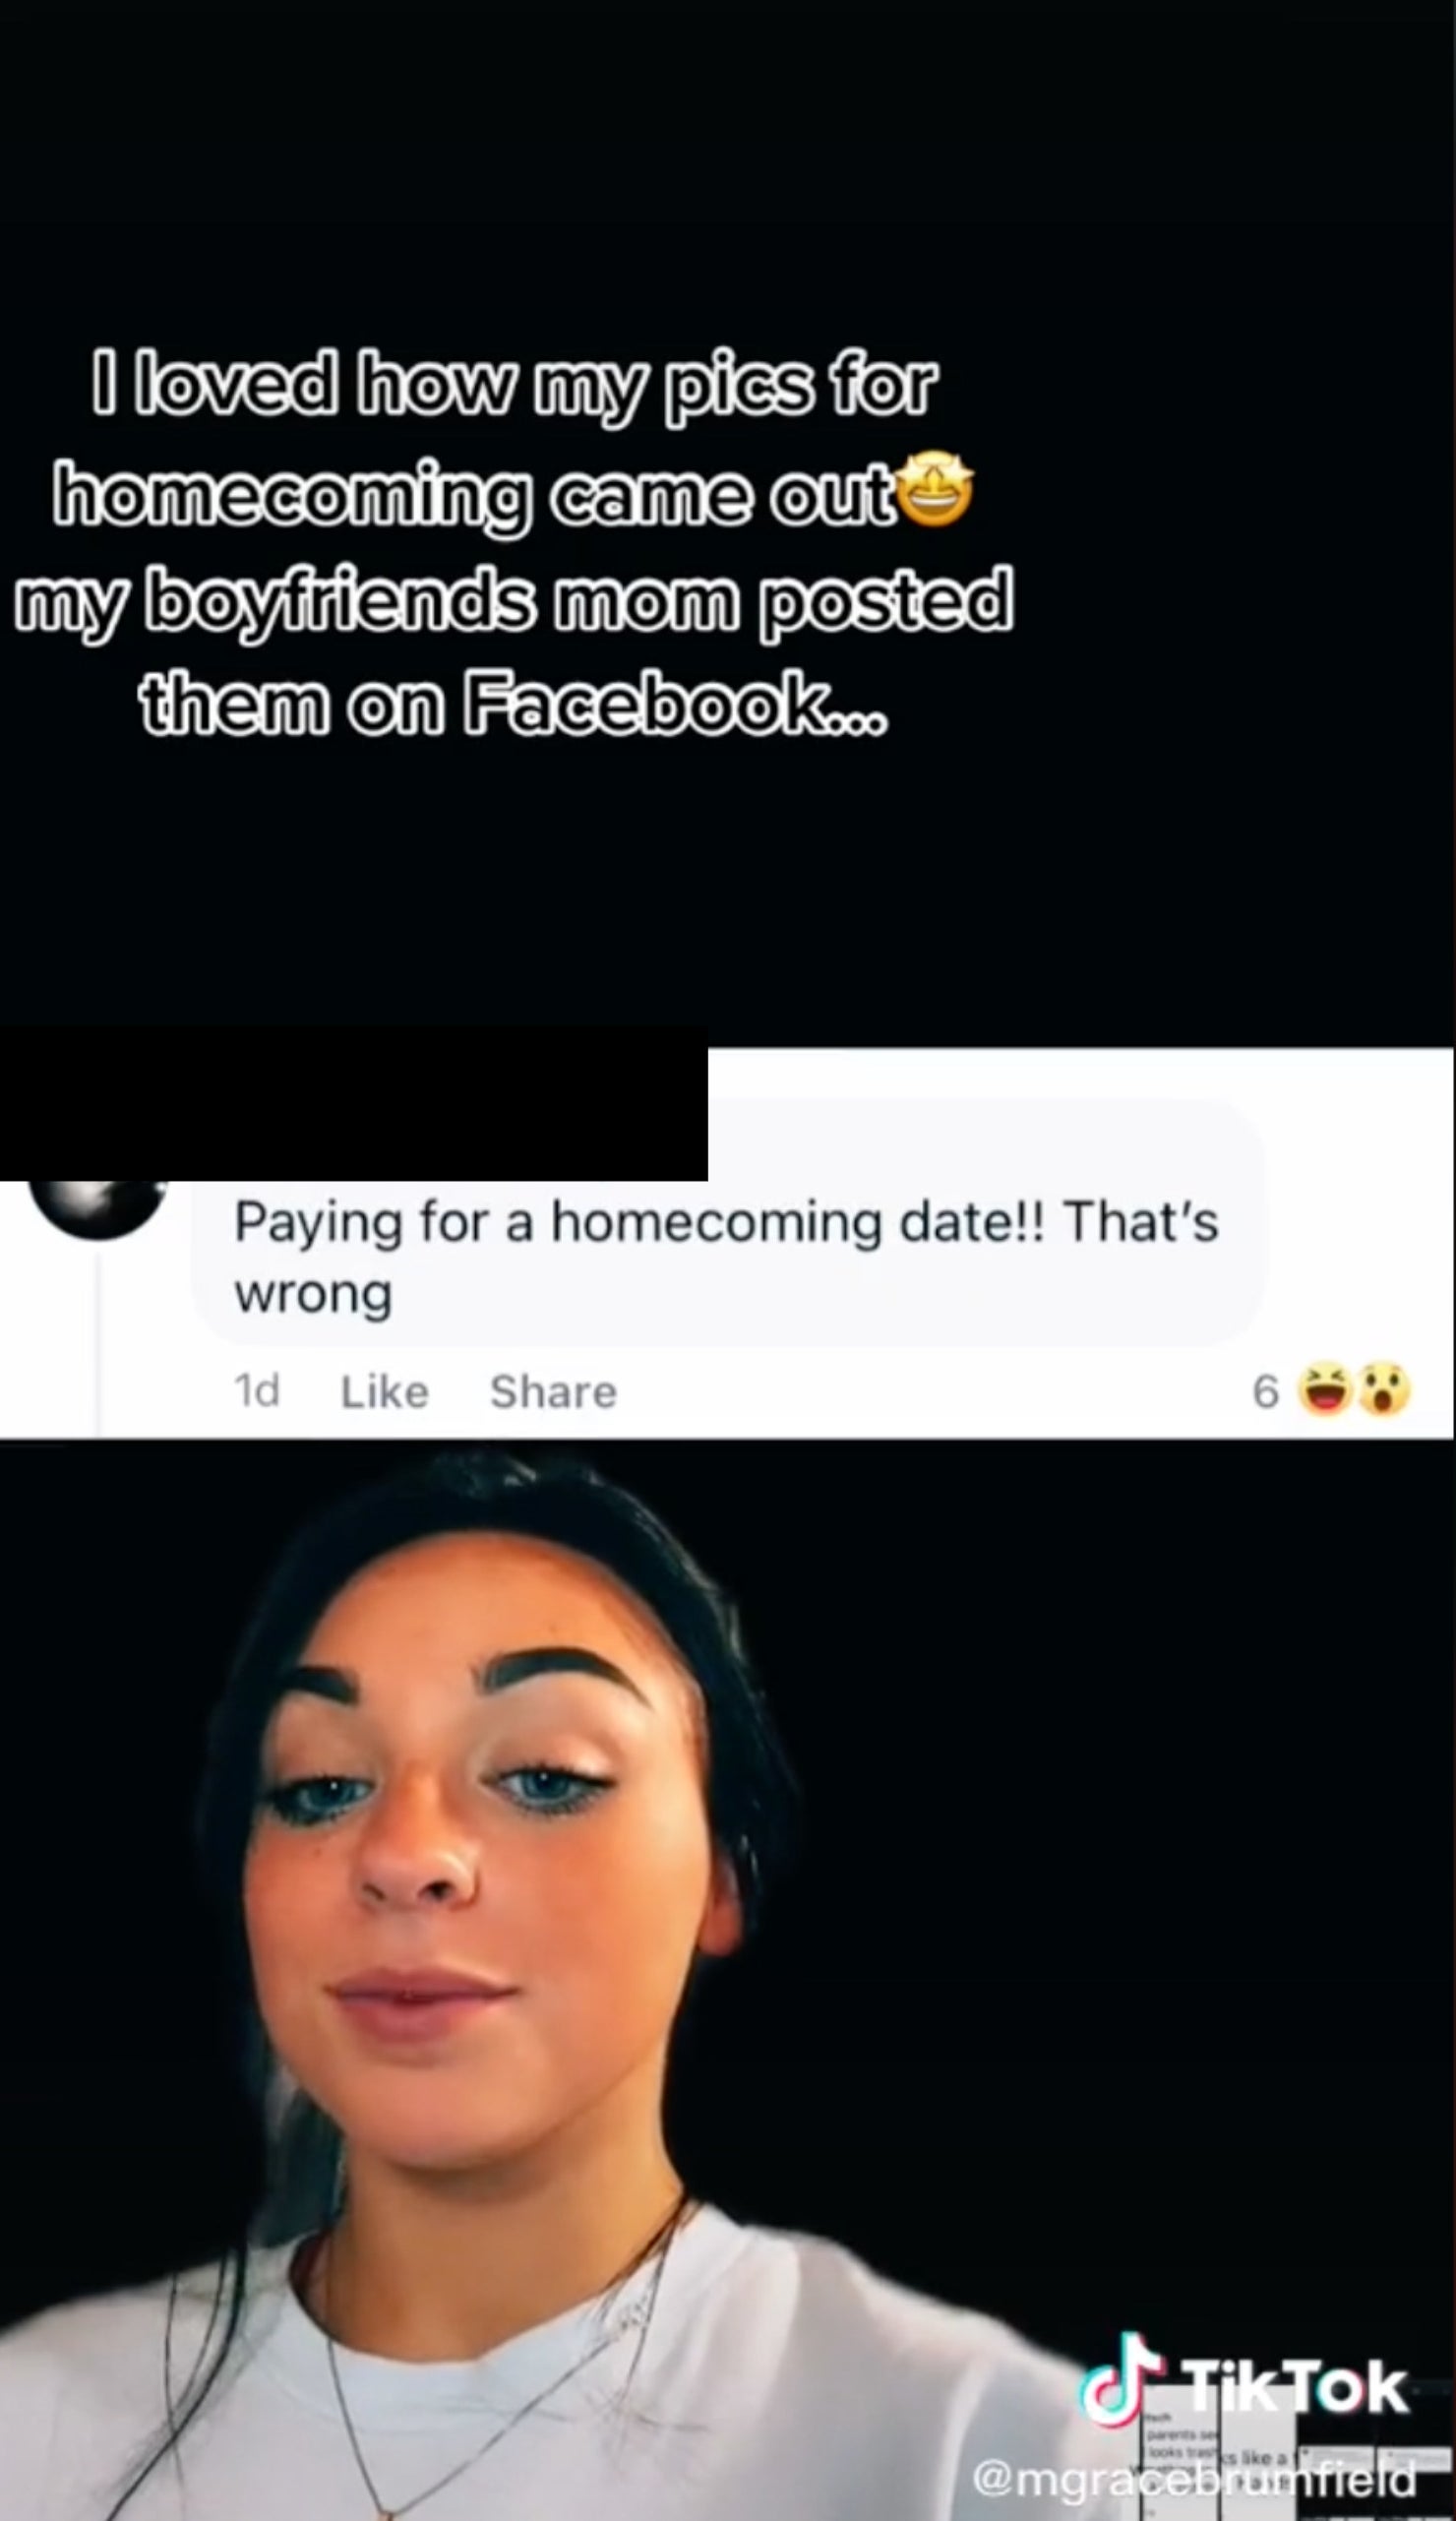 Grace looking down below the comment &quot;Paying for a homecoming date!! That&#x27;s wrong&quot;